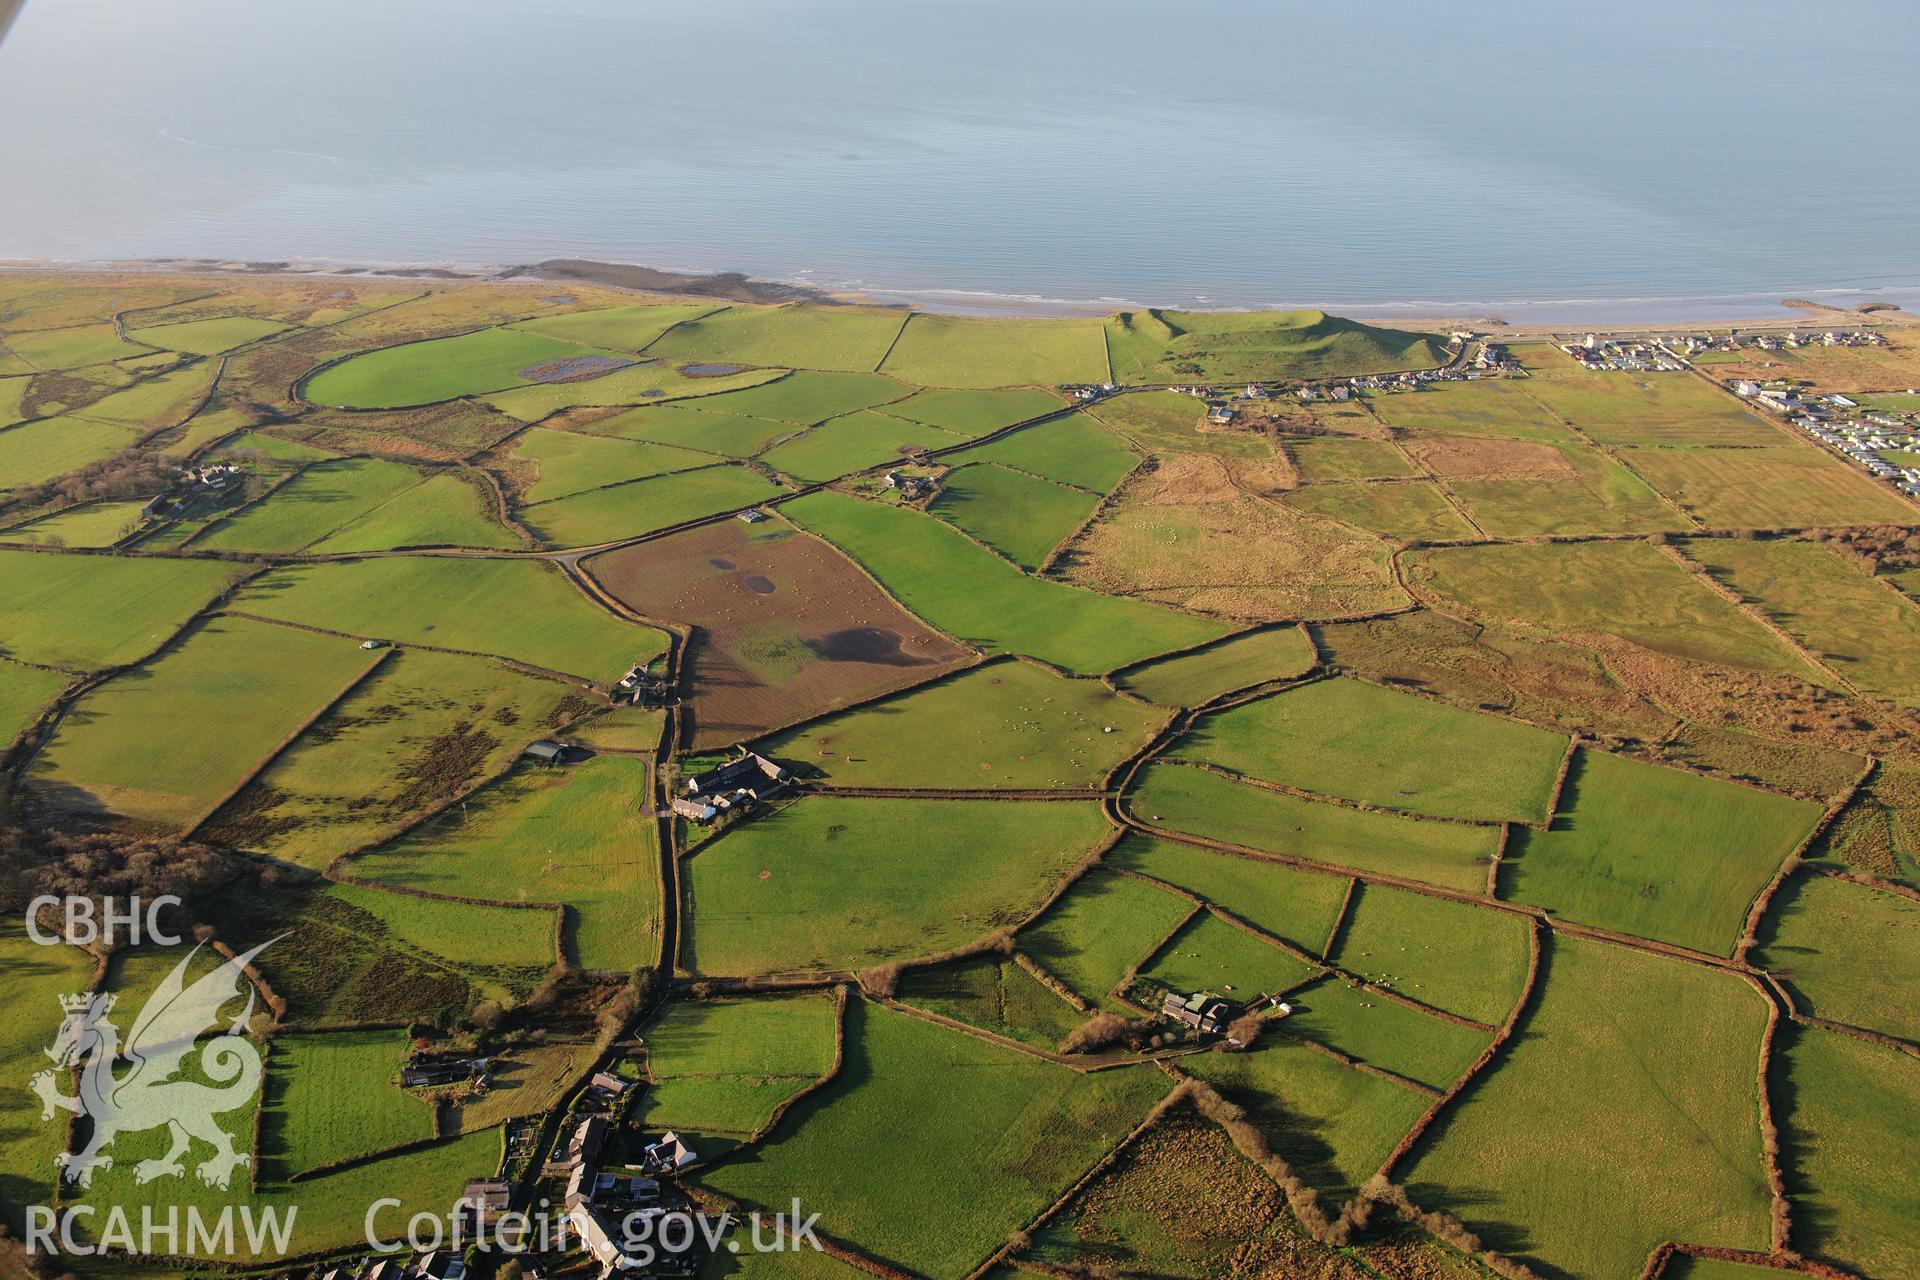 RCAHMW colour oblique photograph of Dinas Dinlle hillfort, wide view. Taken by Toby Driver on 10/12/2012.